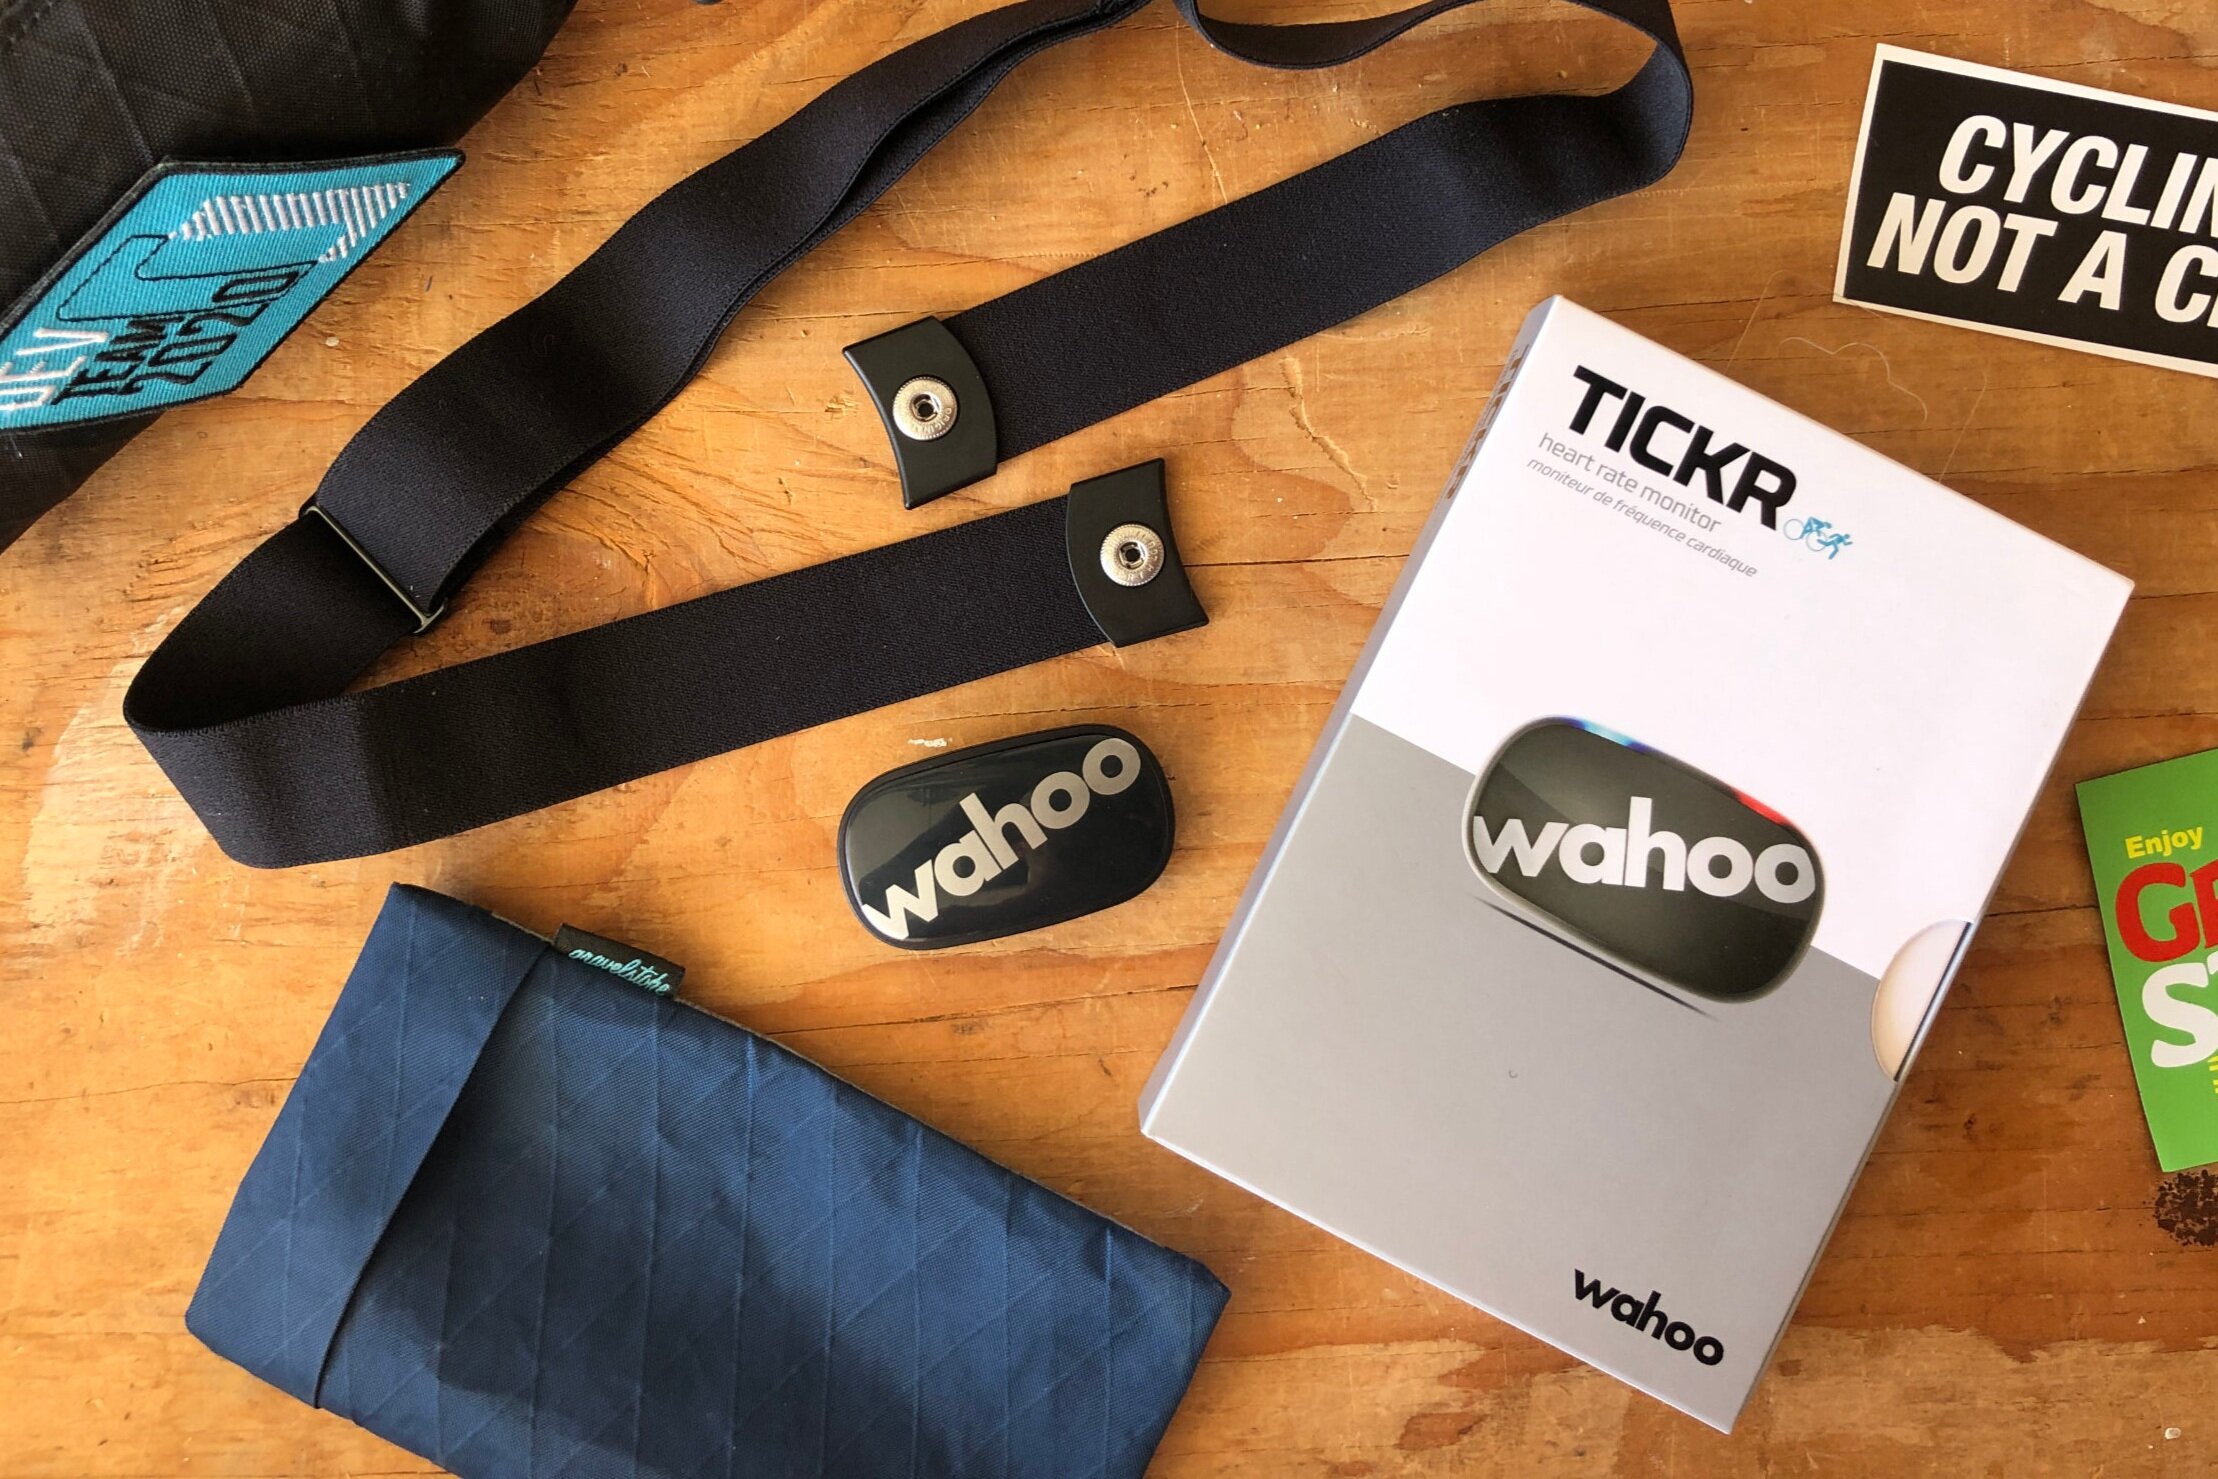 wahoo tickr x heart rate monitor